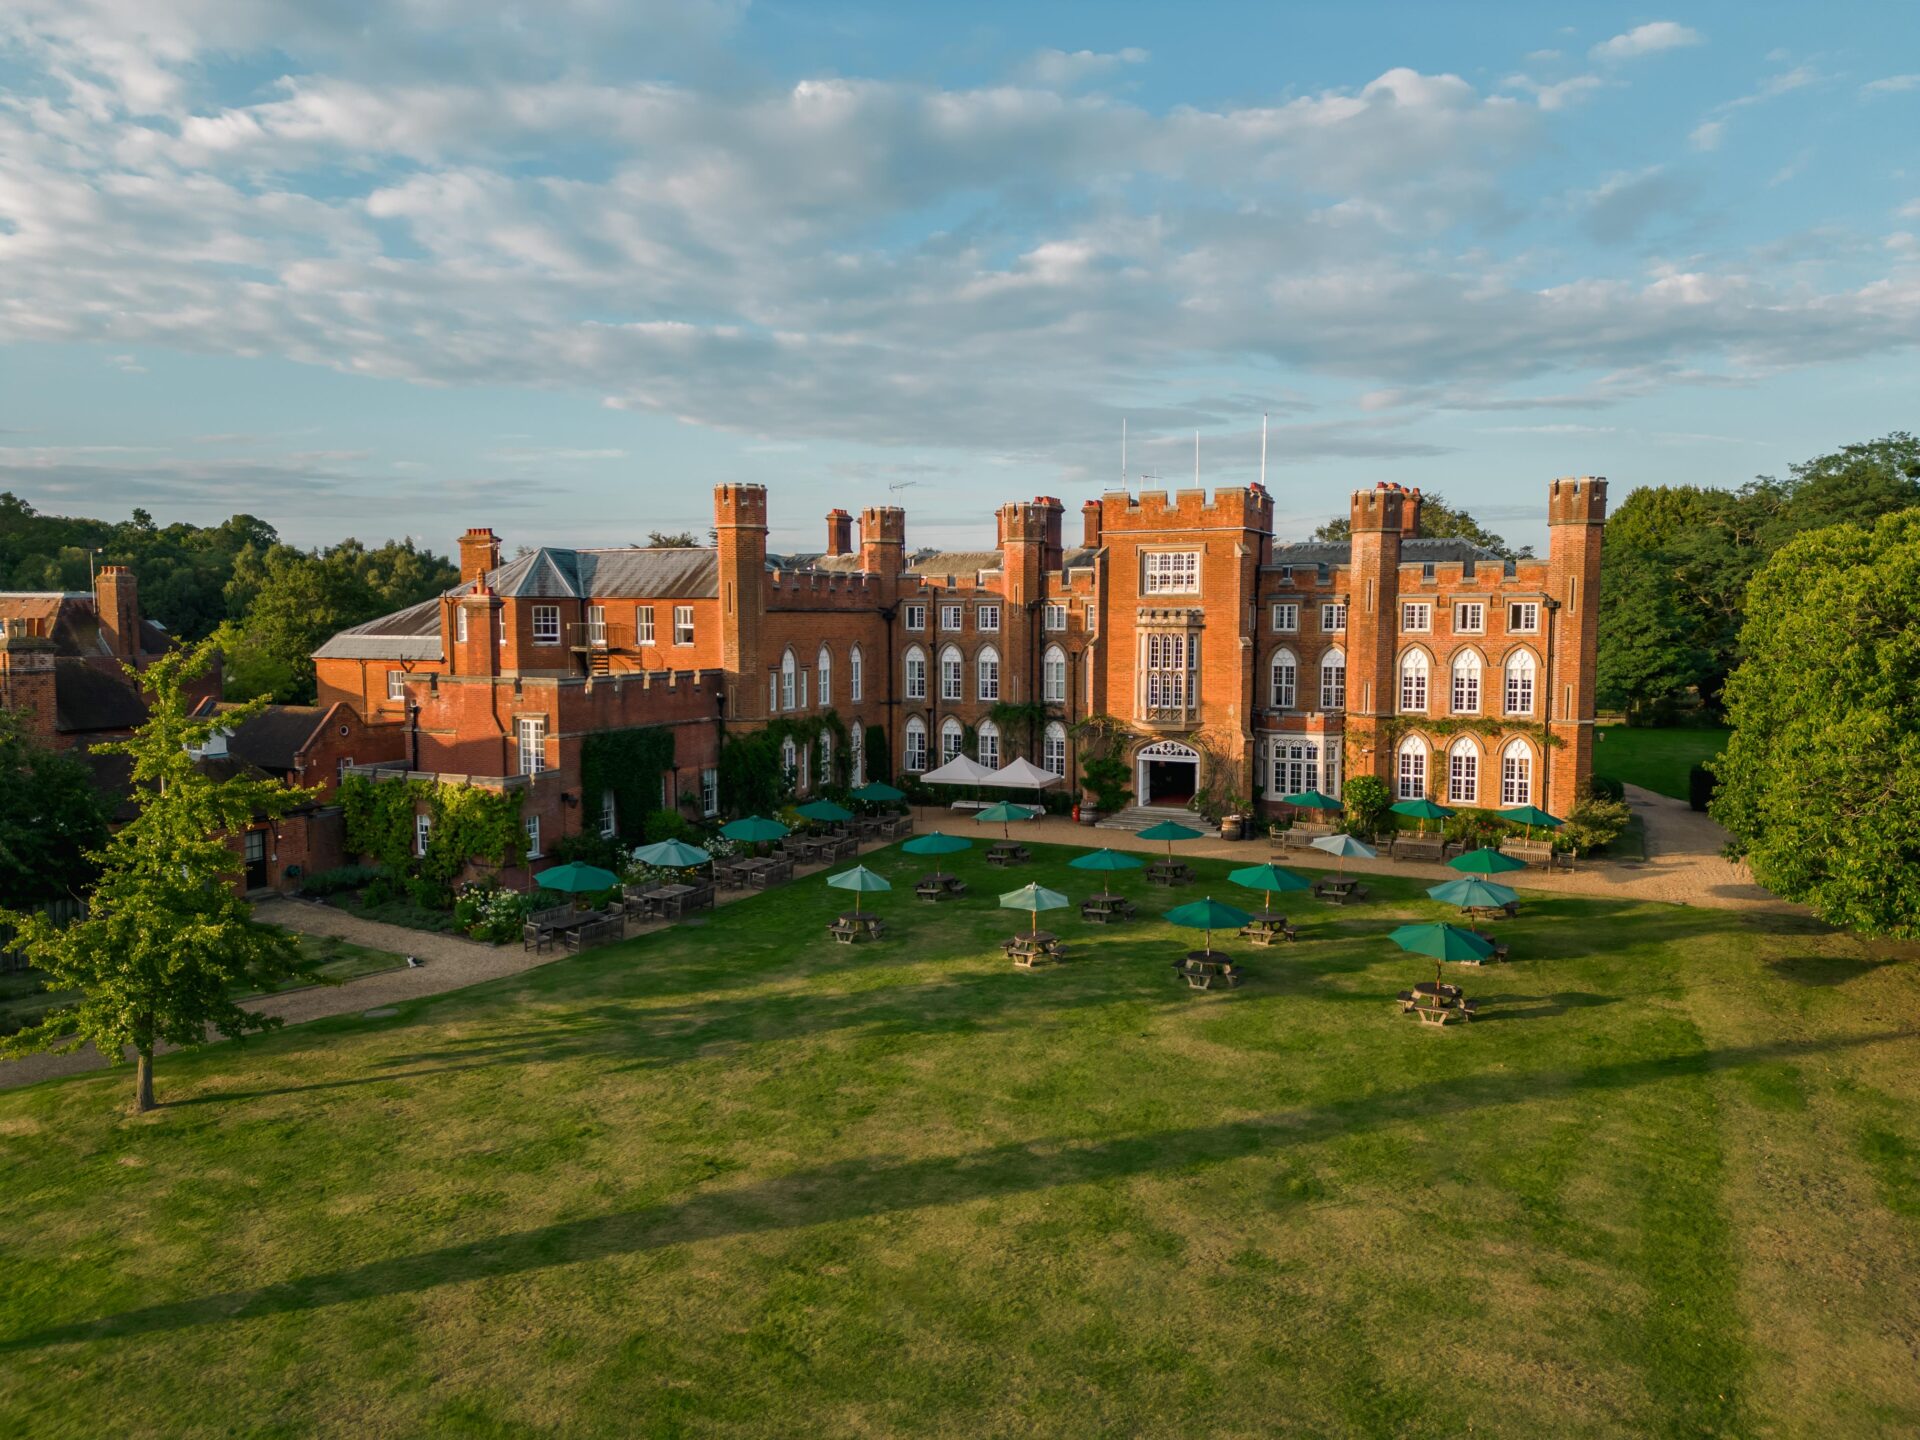 Cumberland Lodge seen from the sky